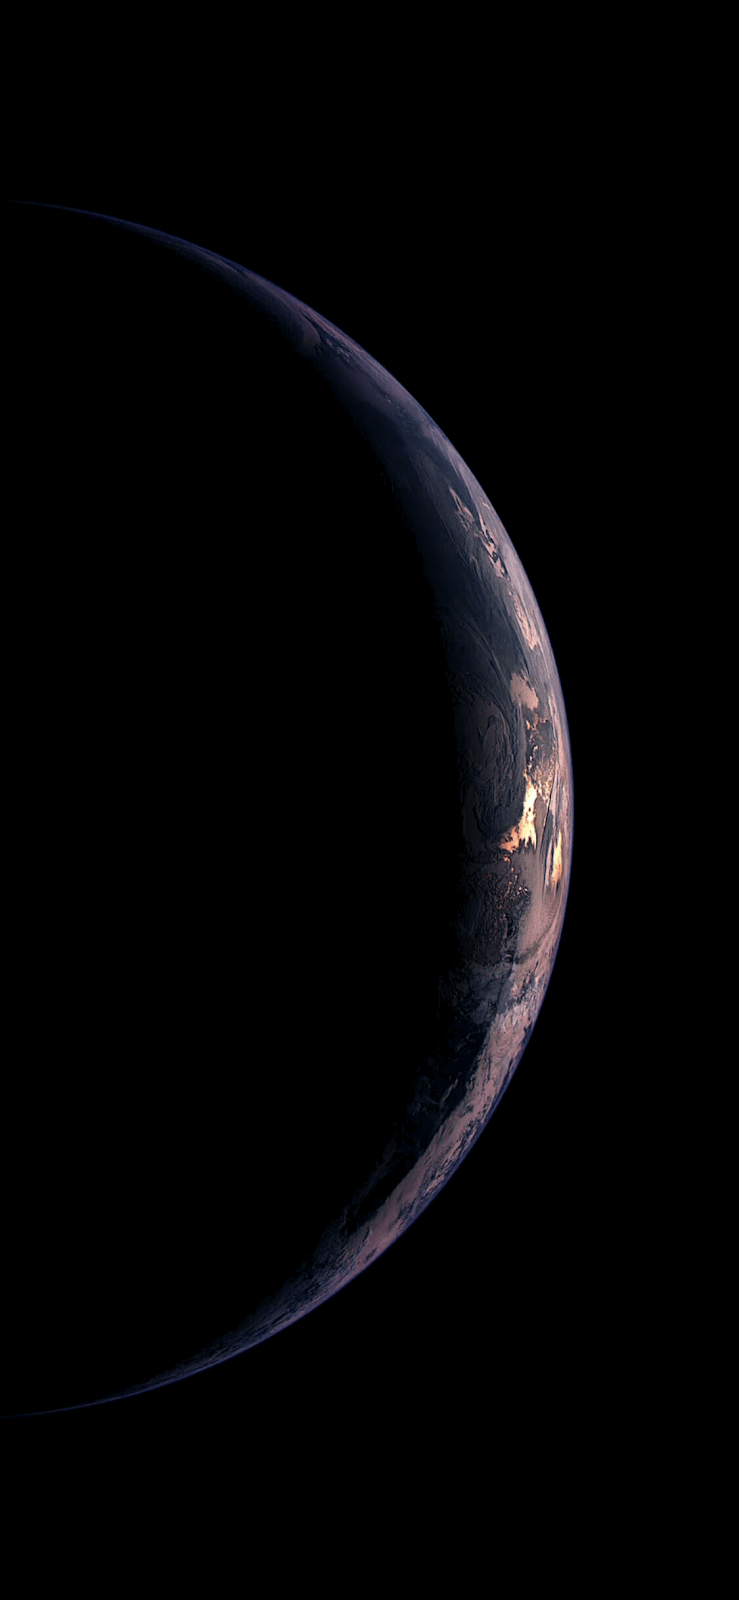 Earth For IPhone X XS ( For Amoled Display). IPhone